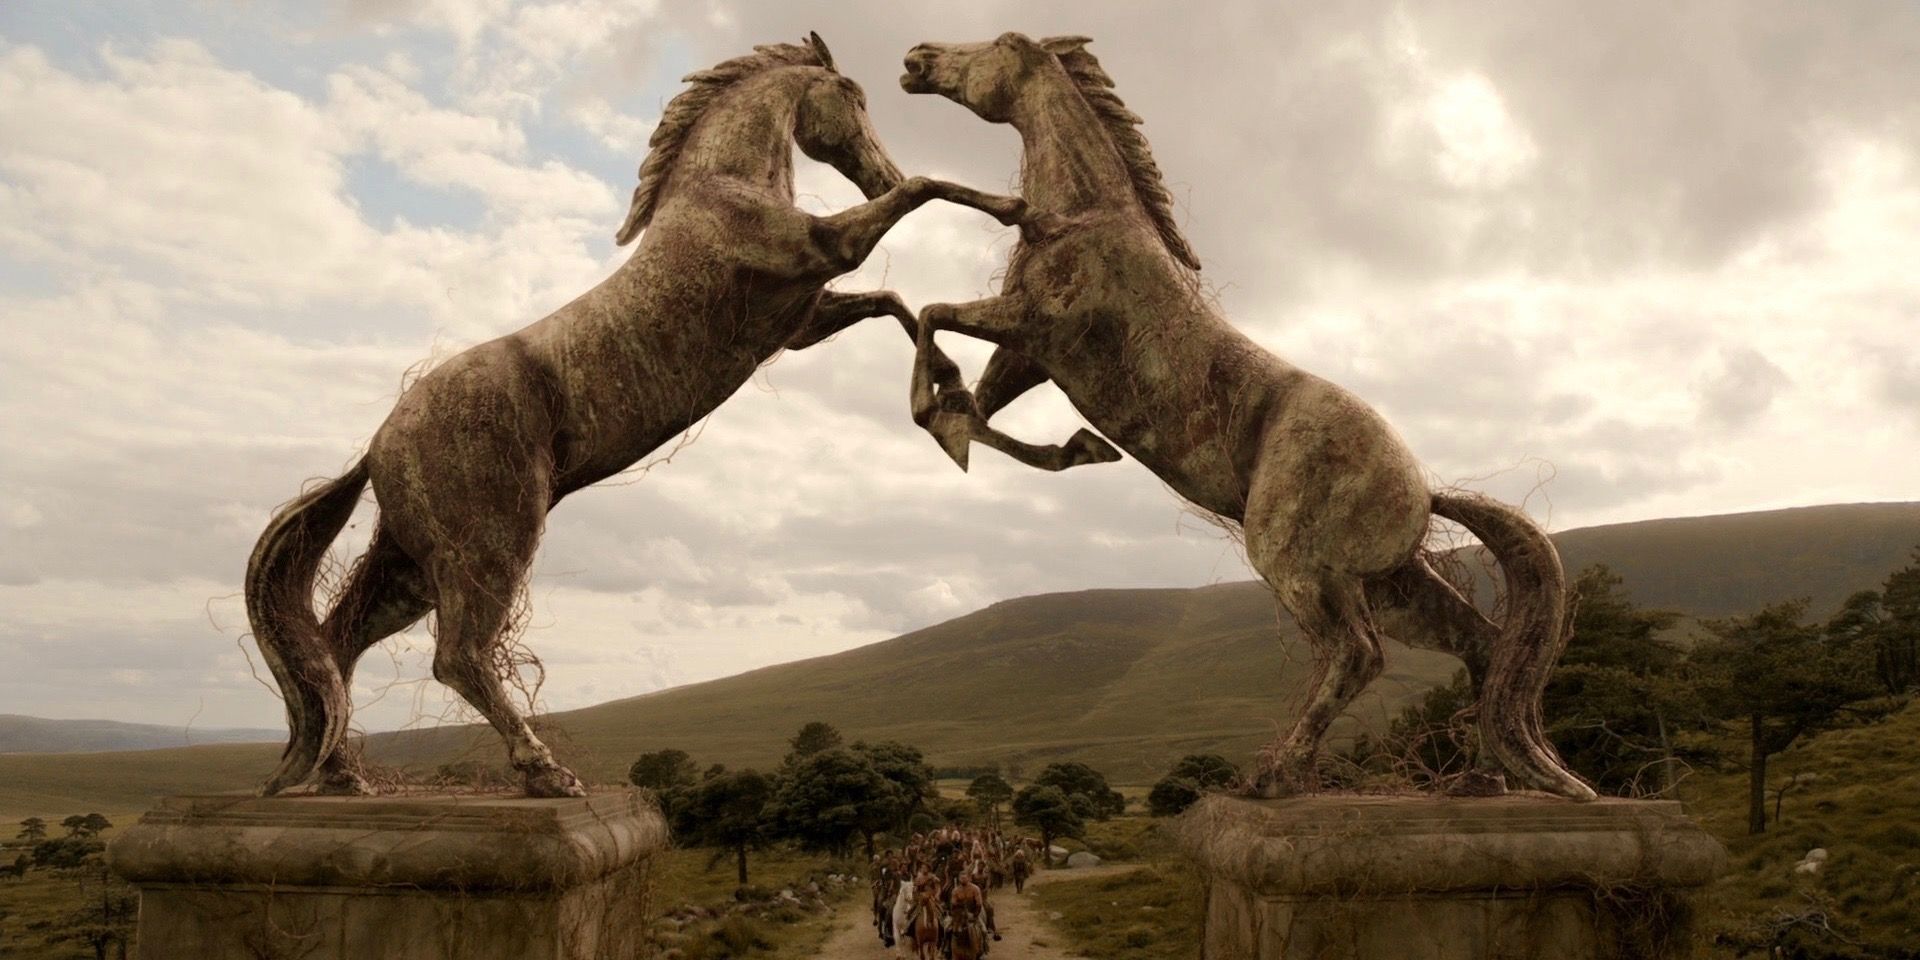 The entrance to the city of Vaes Dothrak in Game of Thrones.